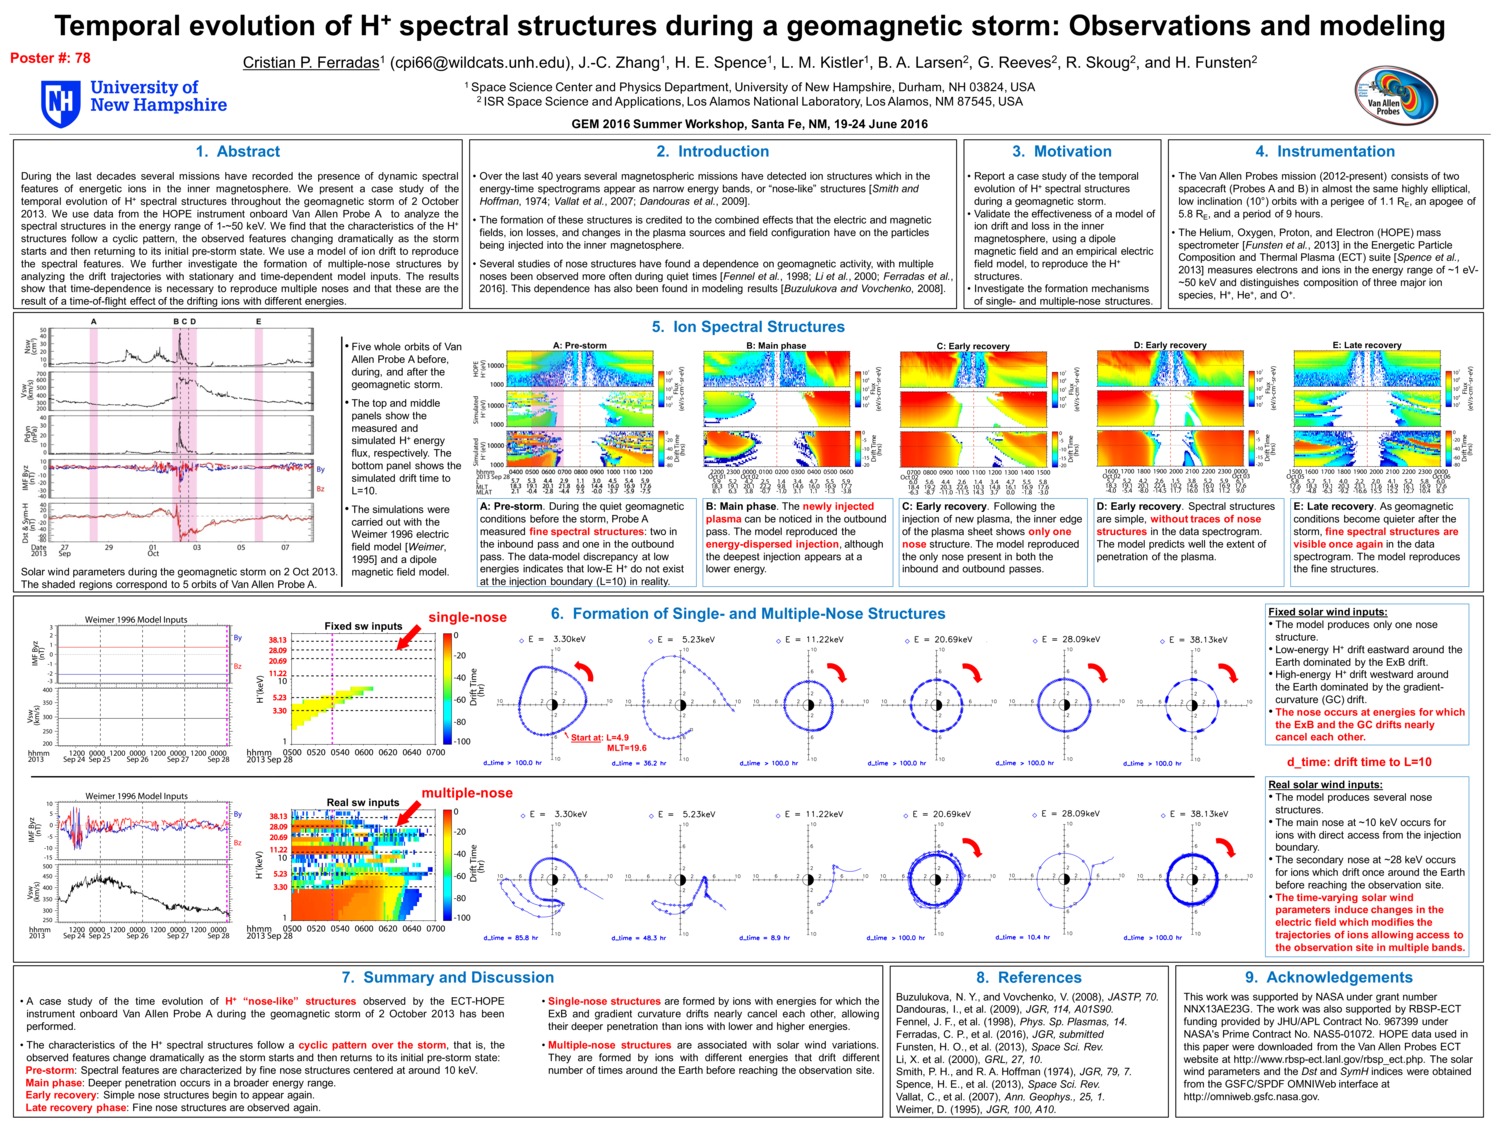 Temporal Evolution Of H+ Spectral Structures During A Geomagnetic Storm: Observations And Modeling by cferradas